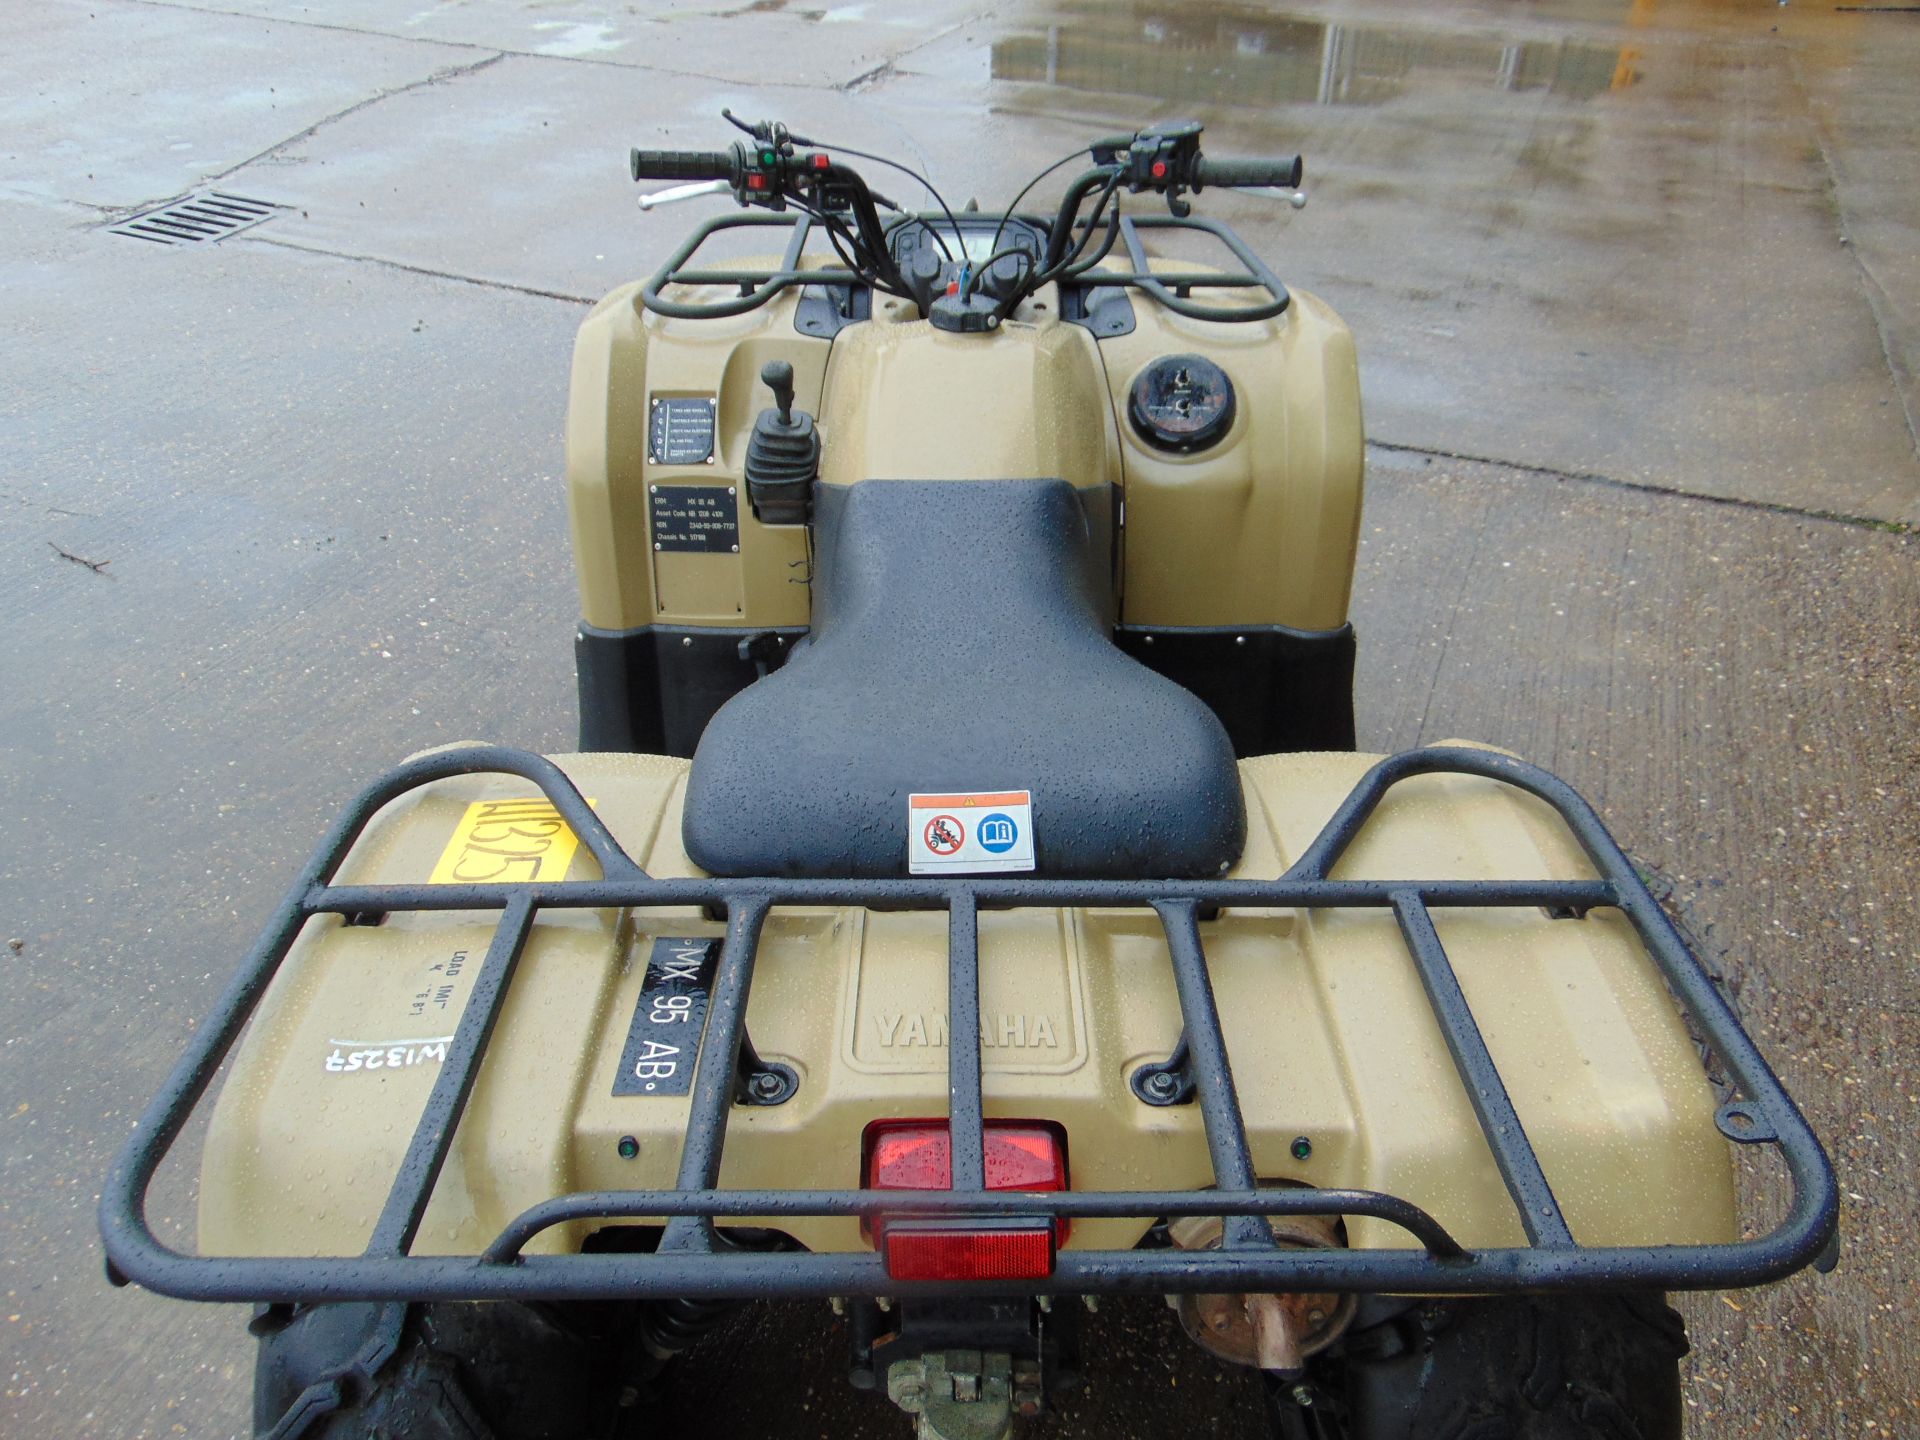 Yamaha Grizzly 450 4 x 4 ATV Quad Bike 1518 hours only from MOD - Image 17 of 24